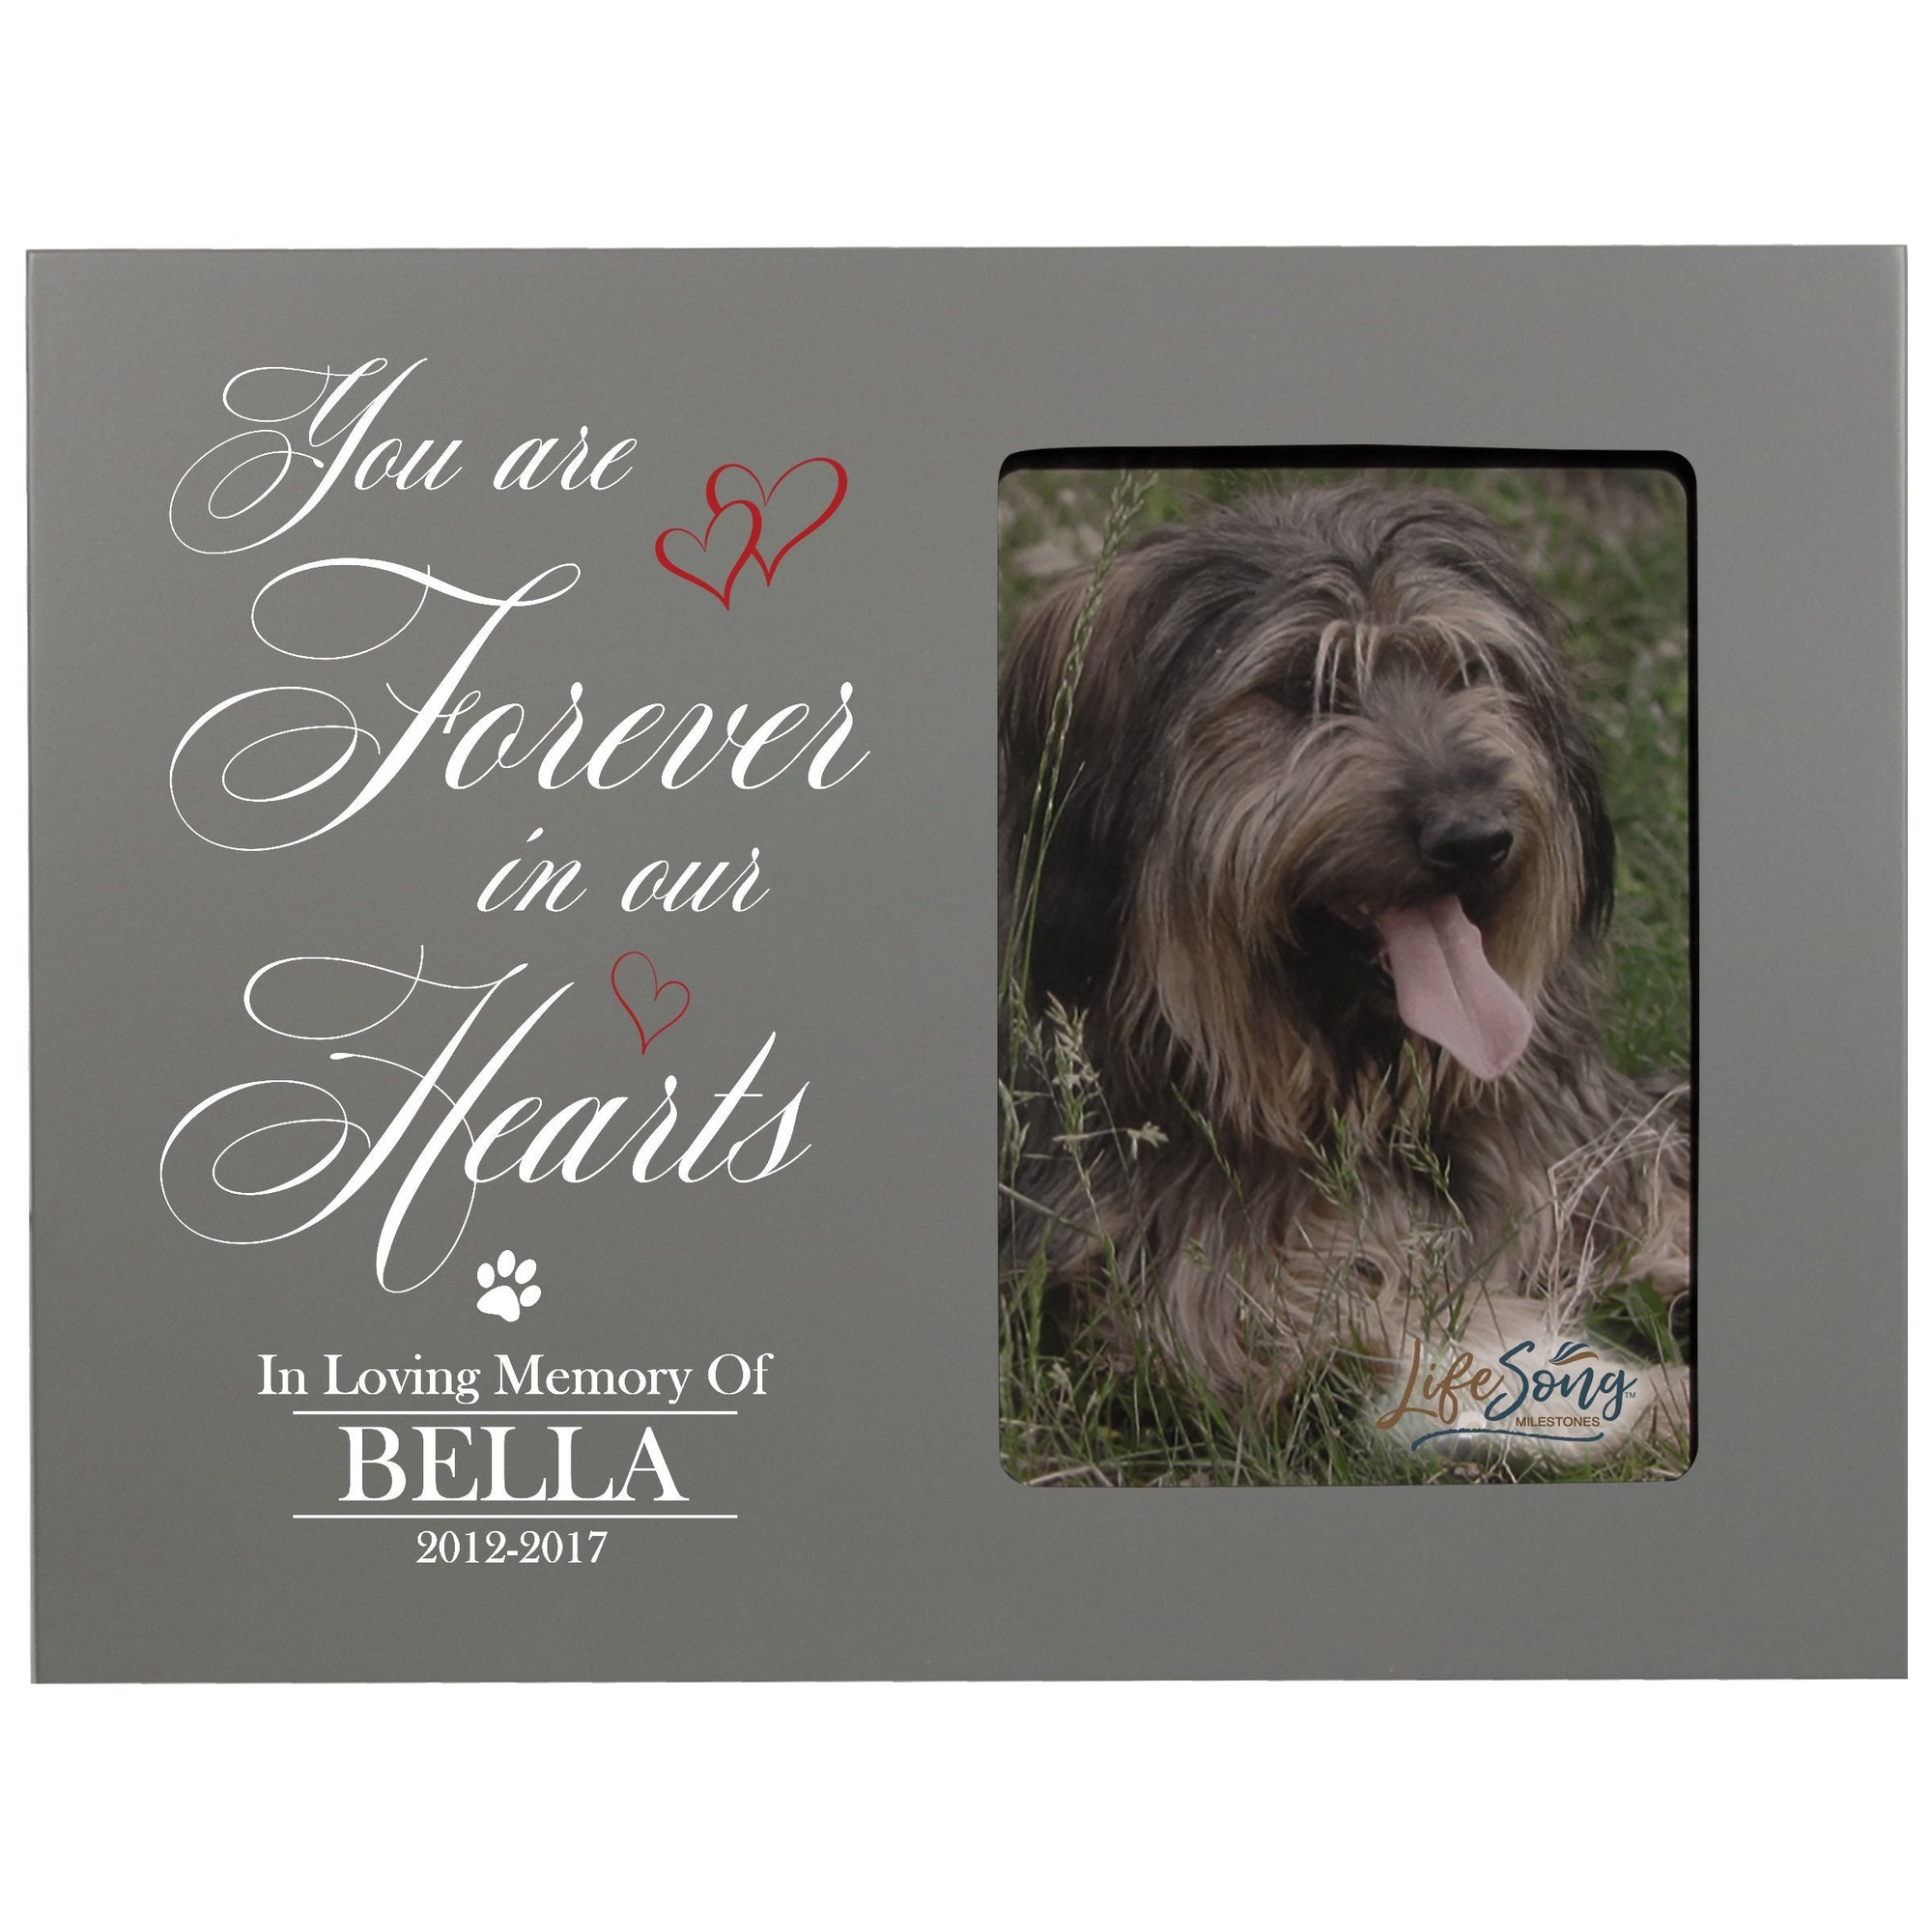 8x10 Grey Pet Memorial Picture Frame with the phrase "You Are Forever In Our Hearts"